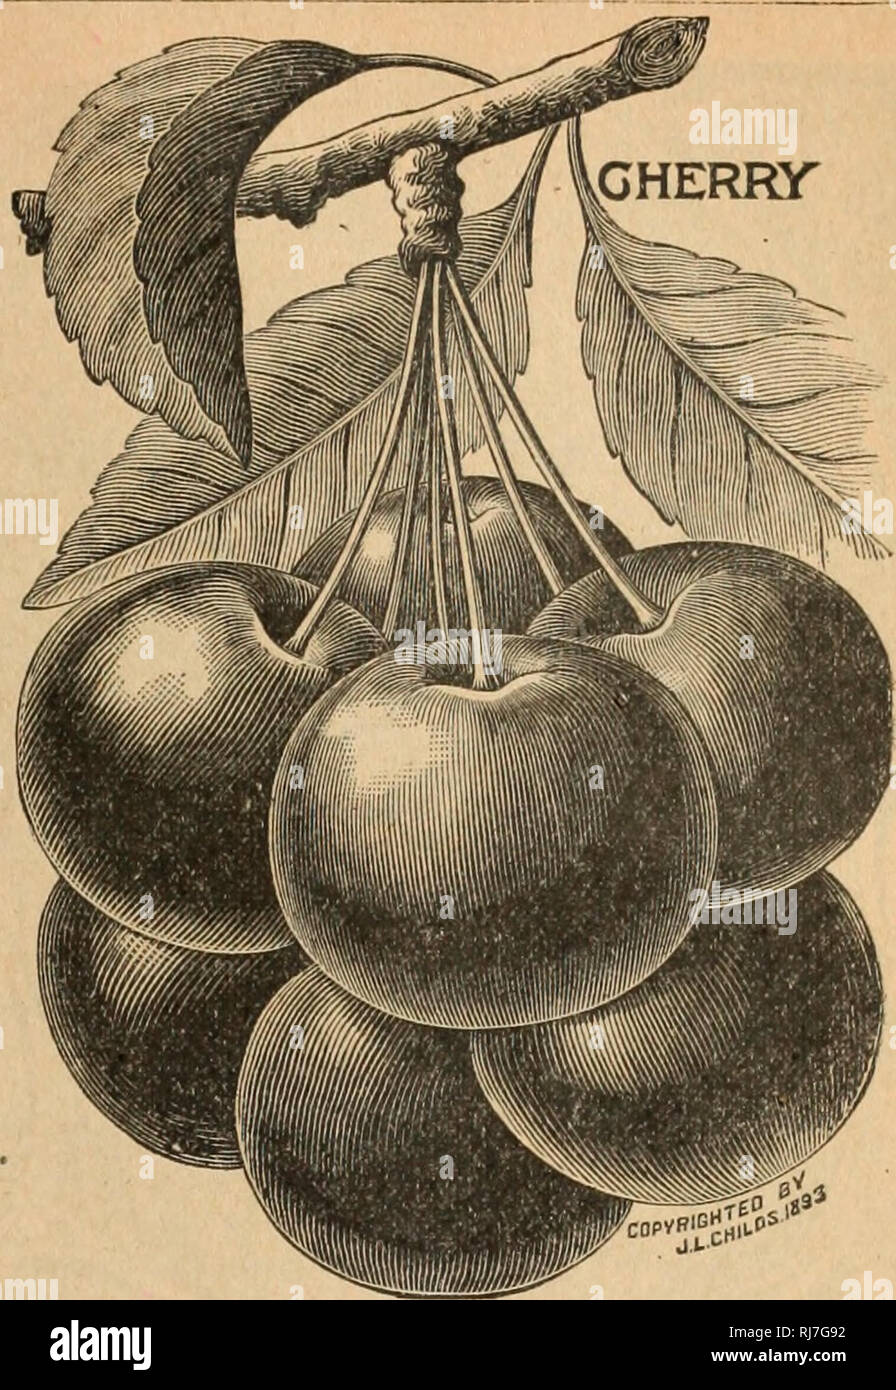 The History of the “Forbidden” Fruit